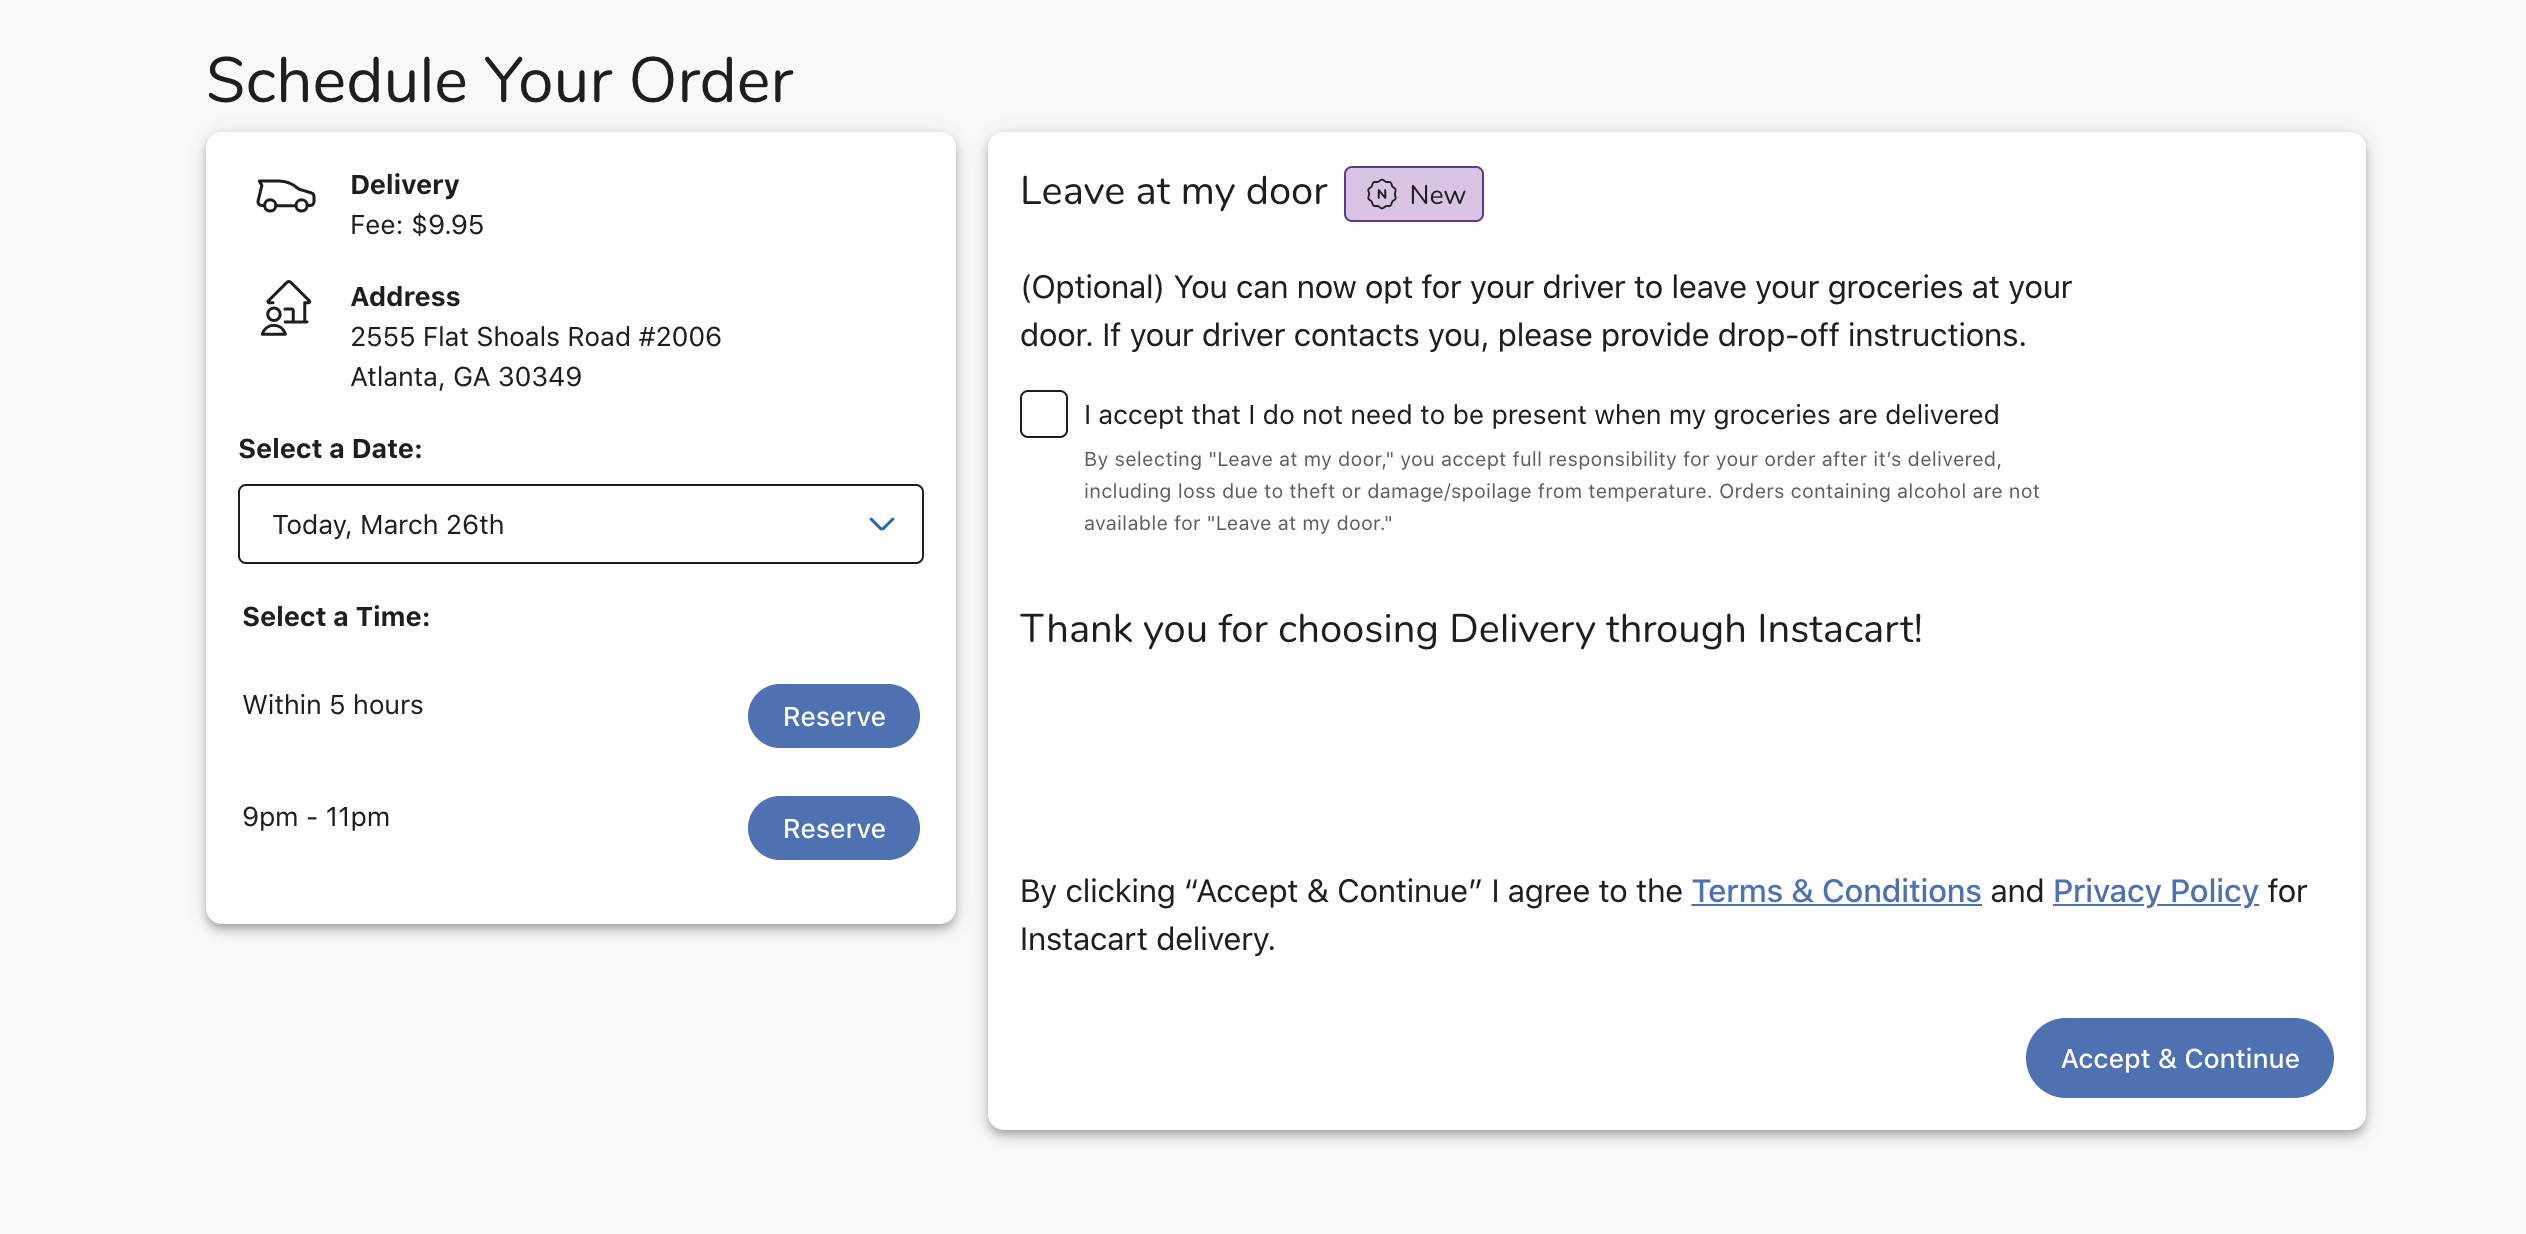 On the Schedule Your Order page, the text is placed above the acceptance button.